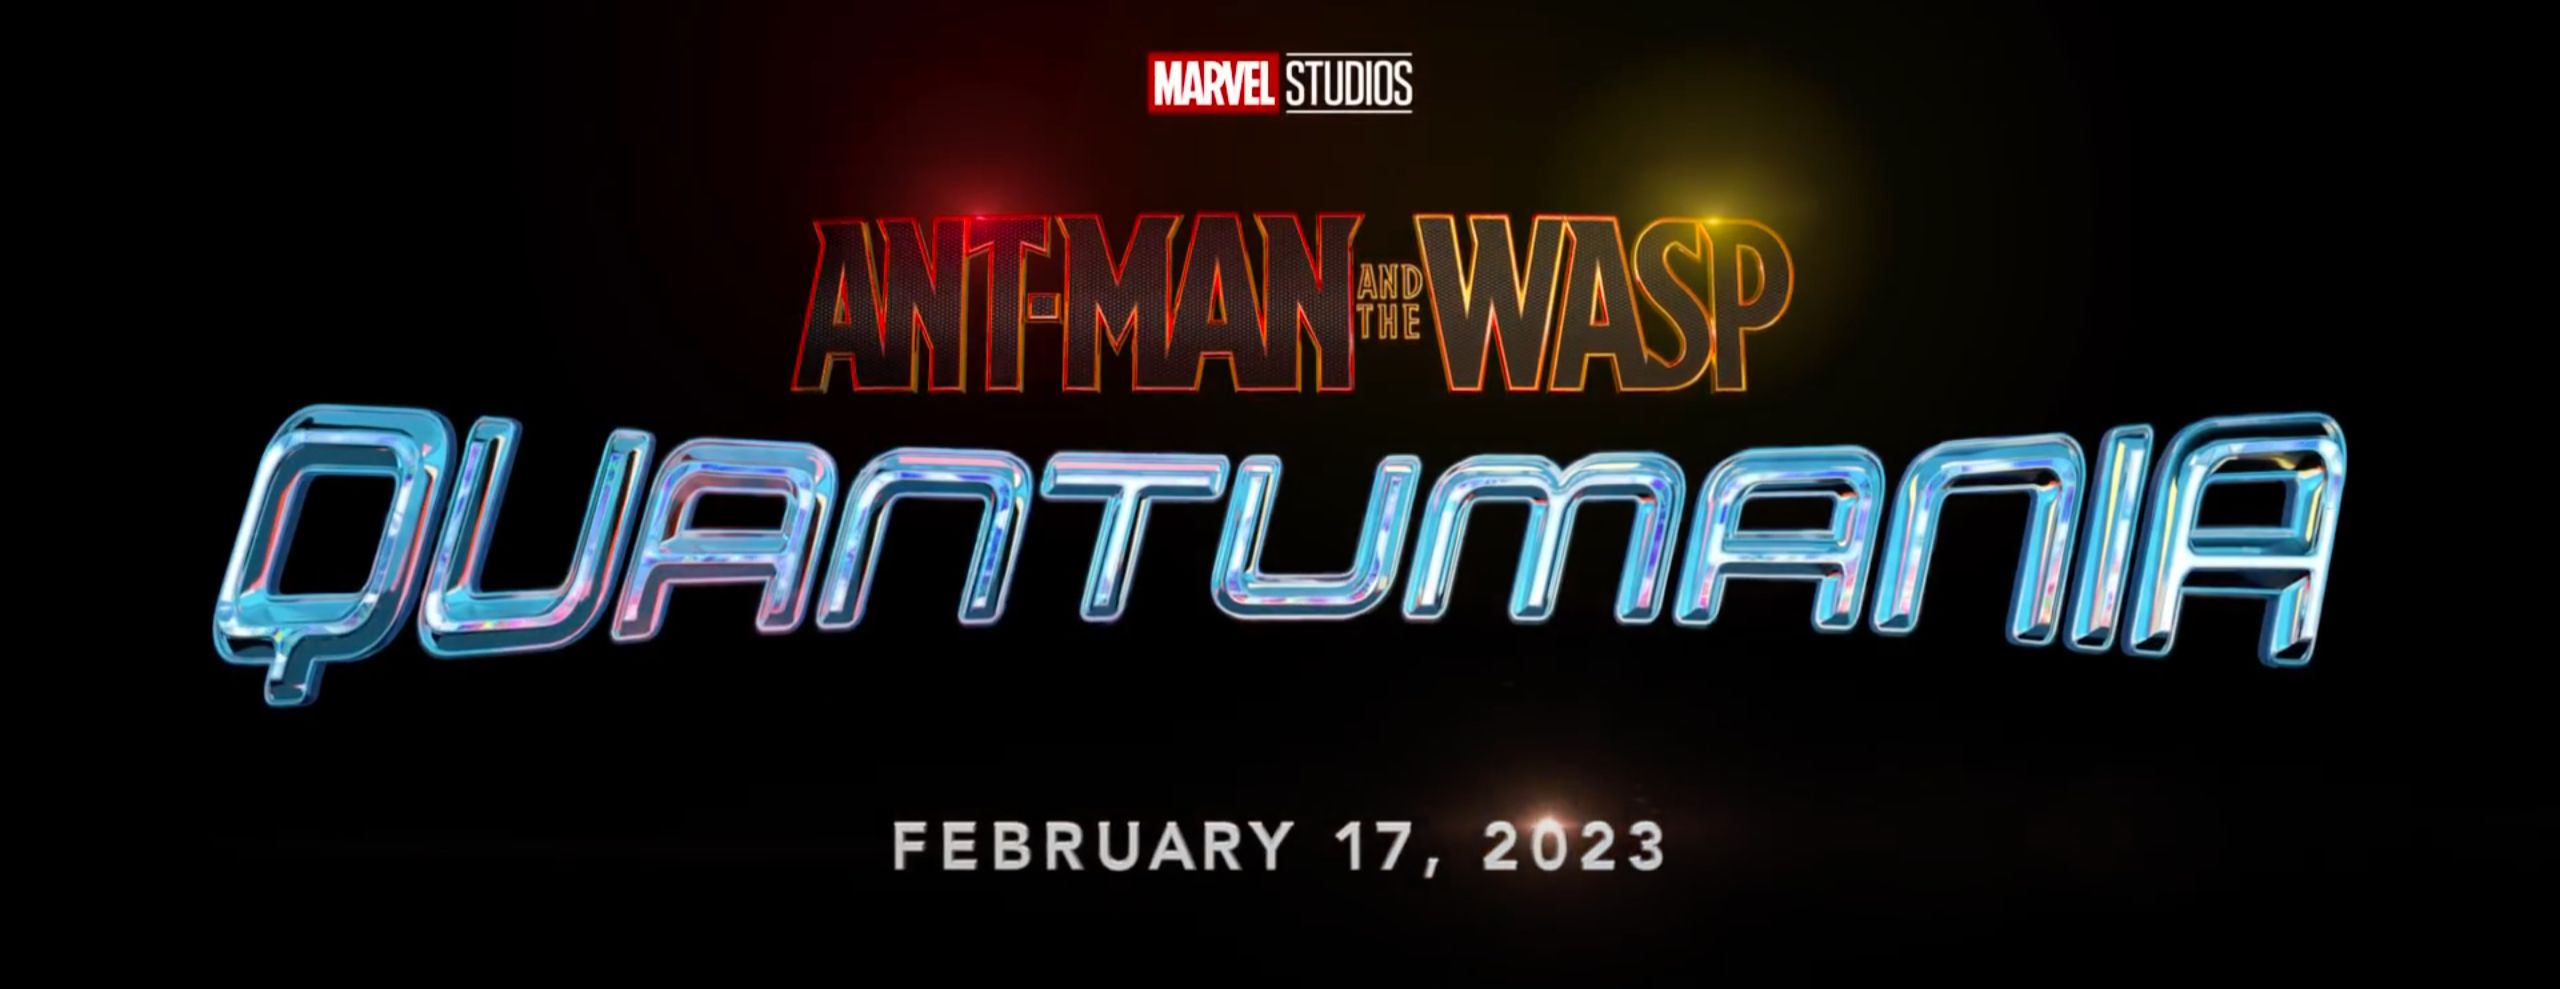 Ant-Man 3 logo and release date